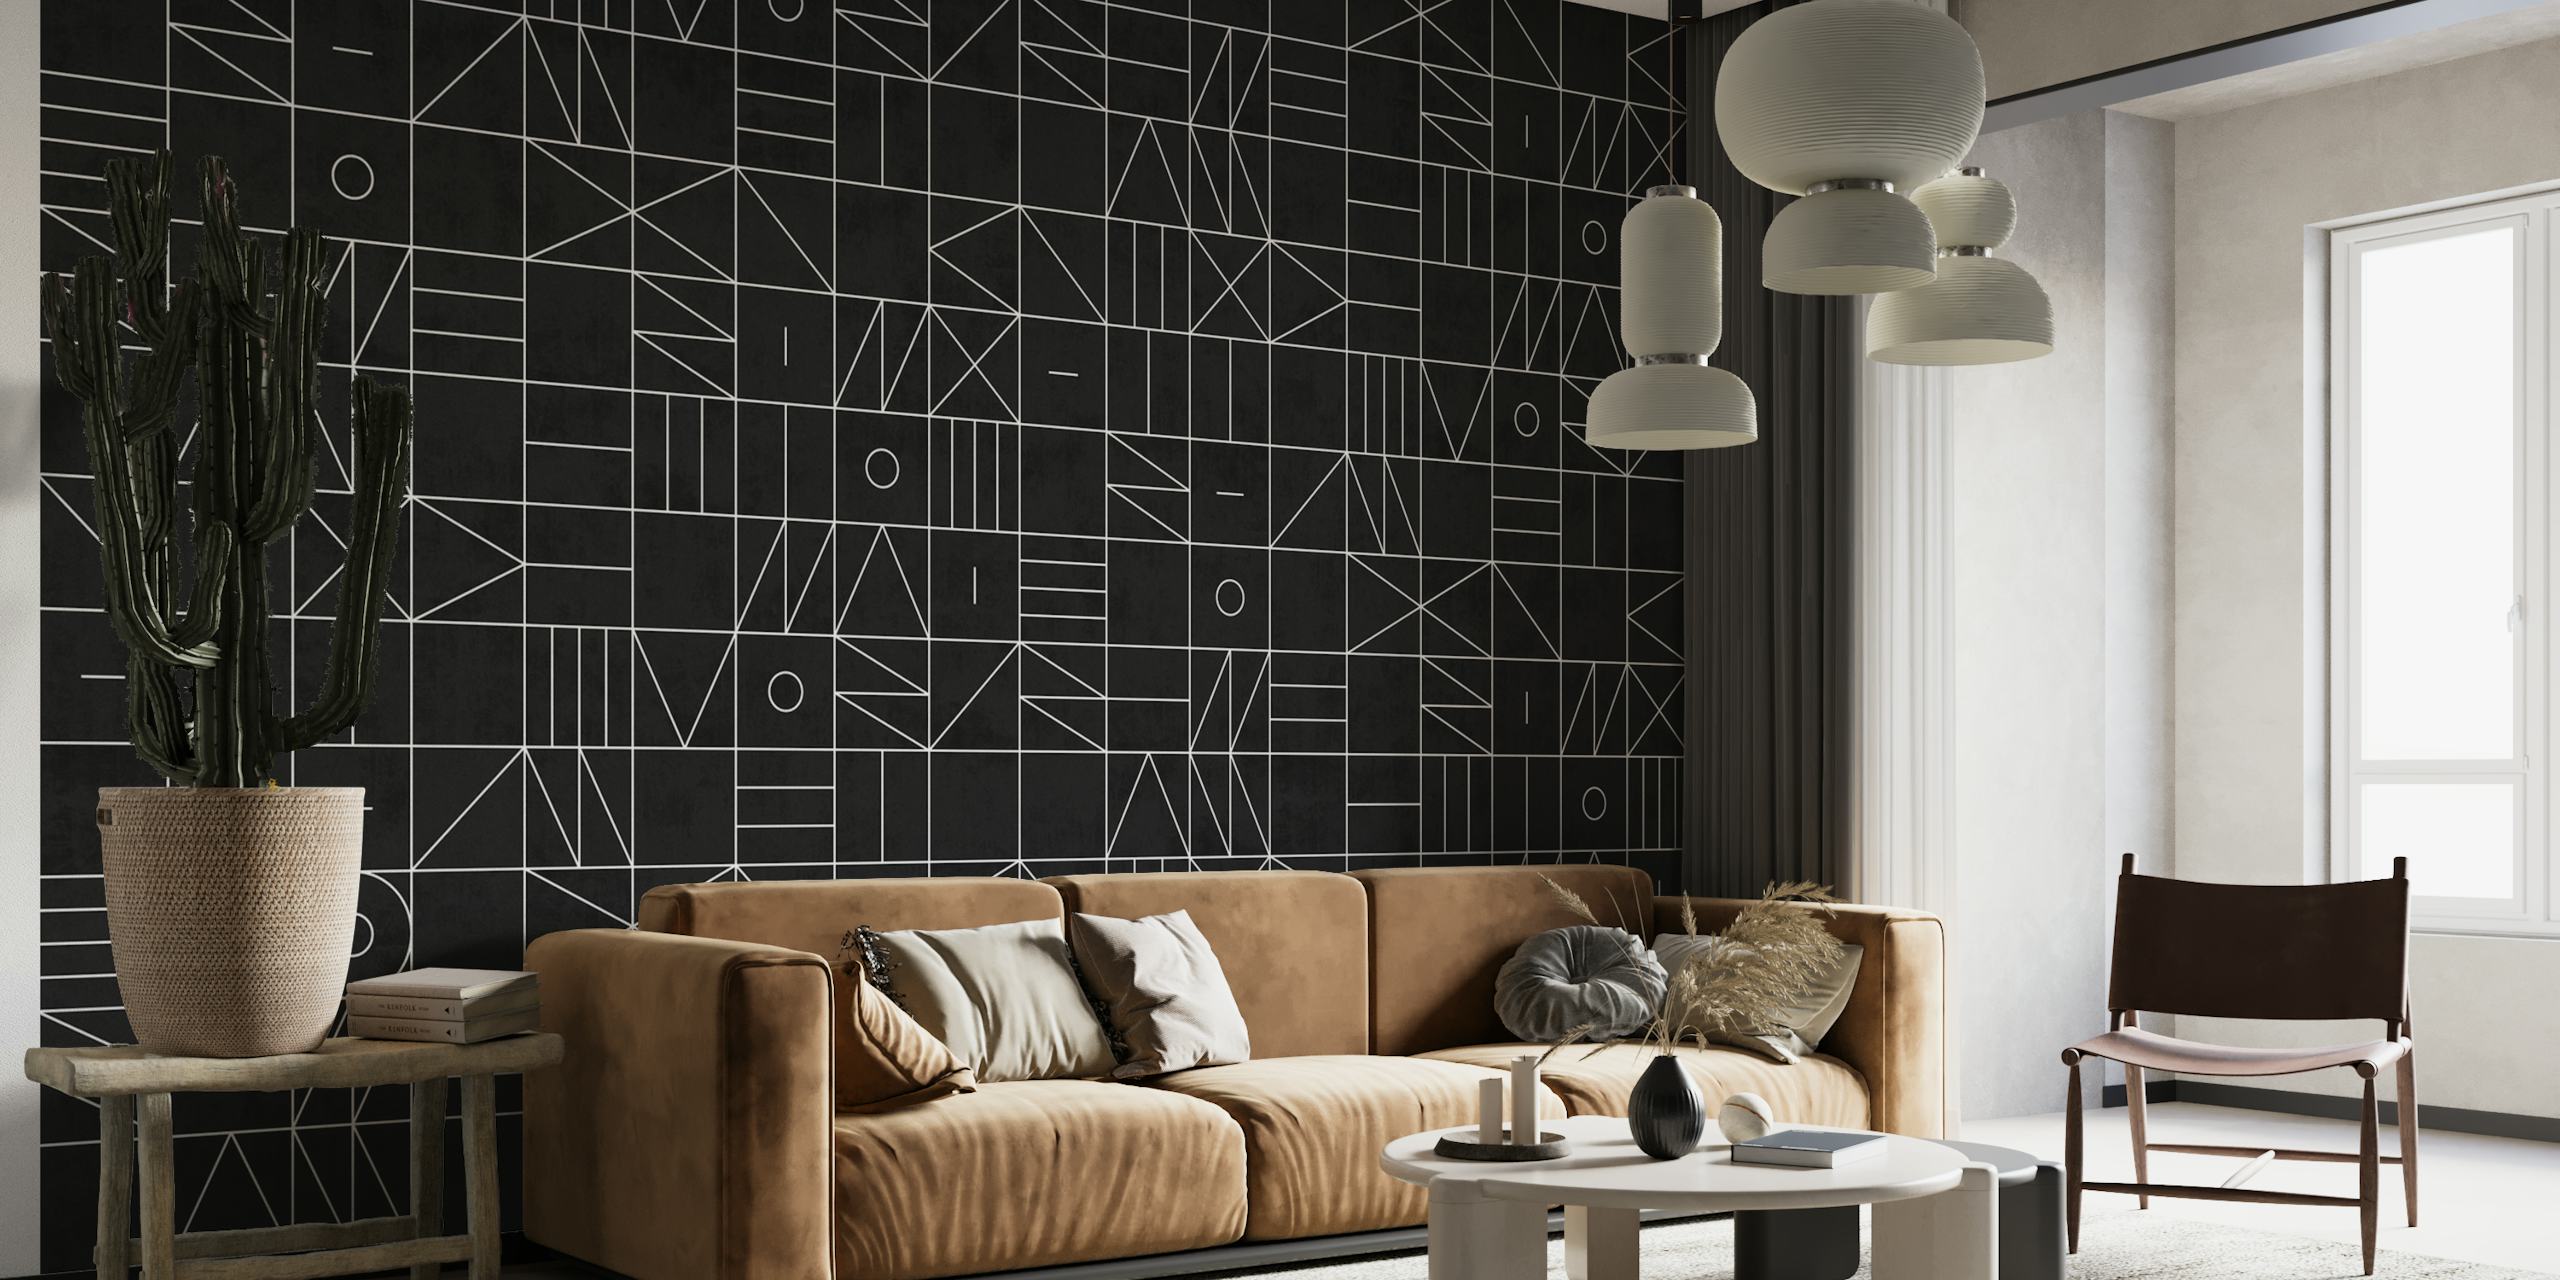 Abstract geometric pattern wall mural in black and white